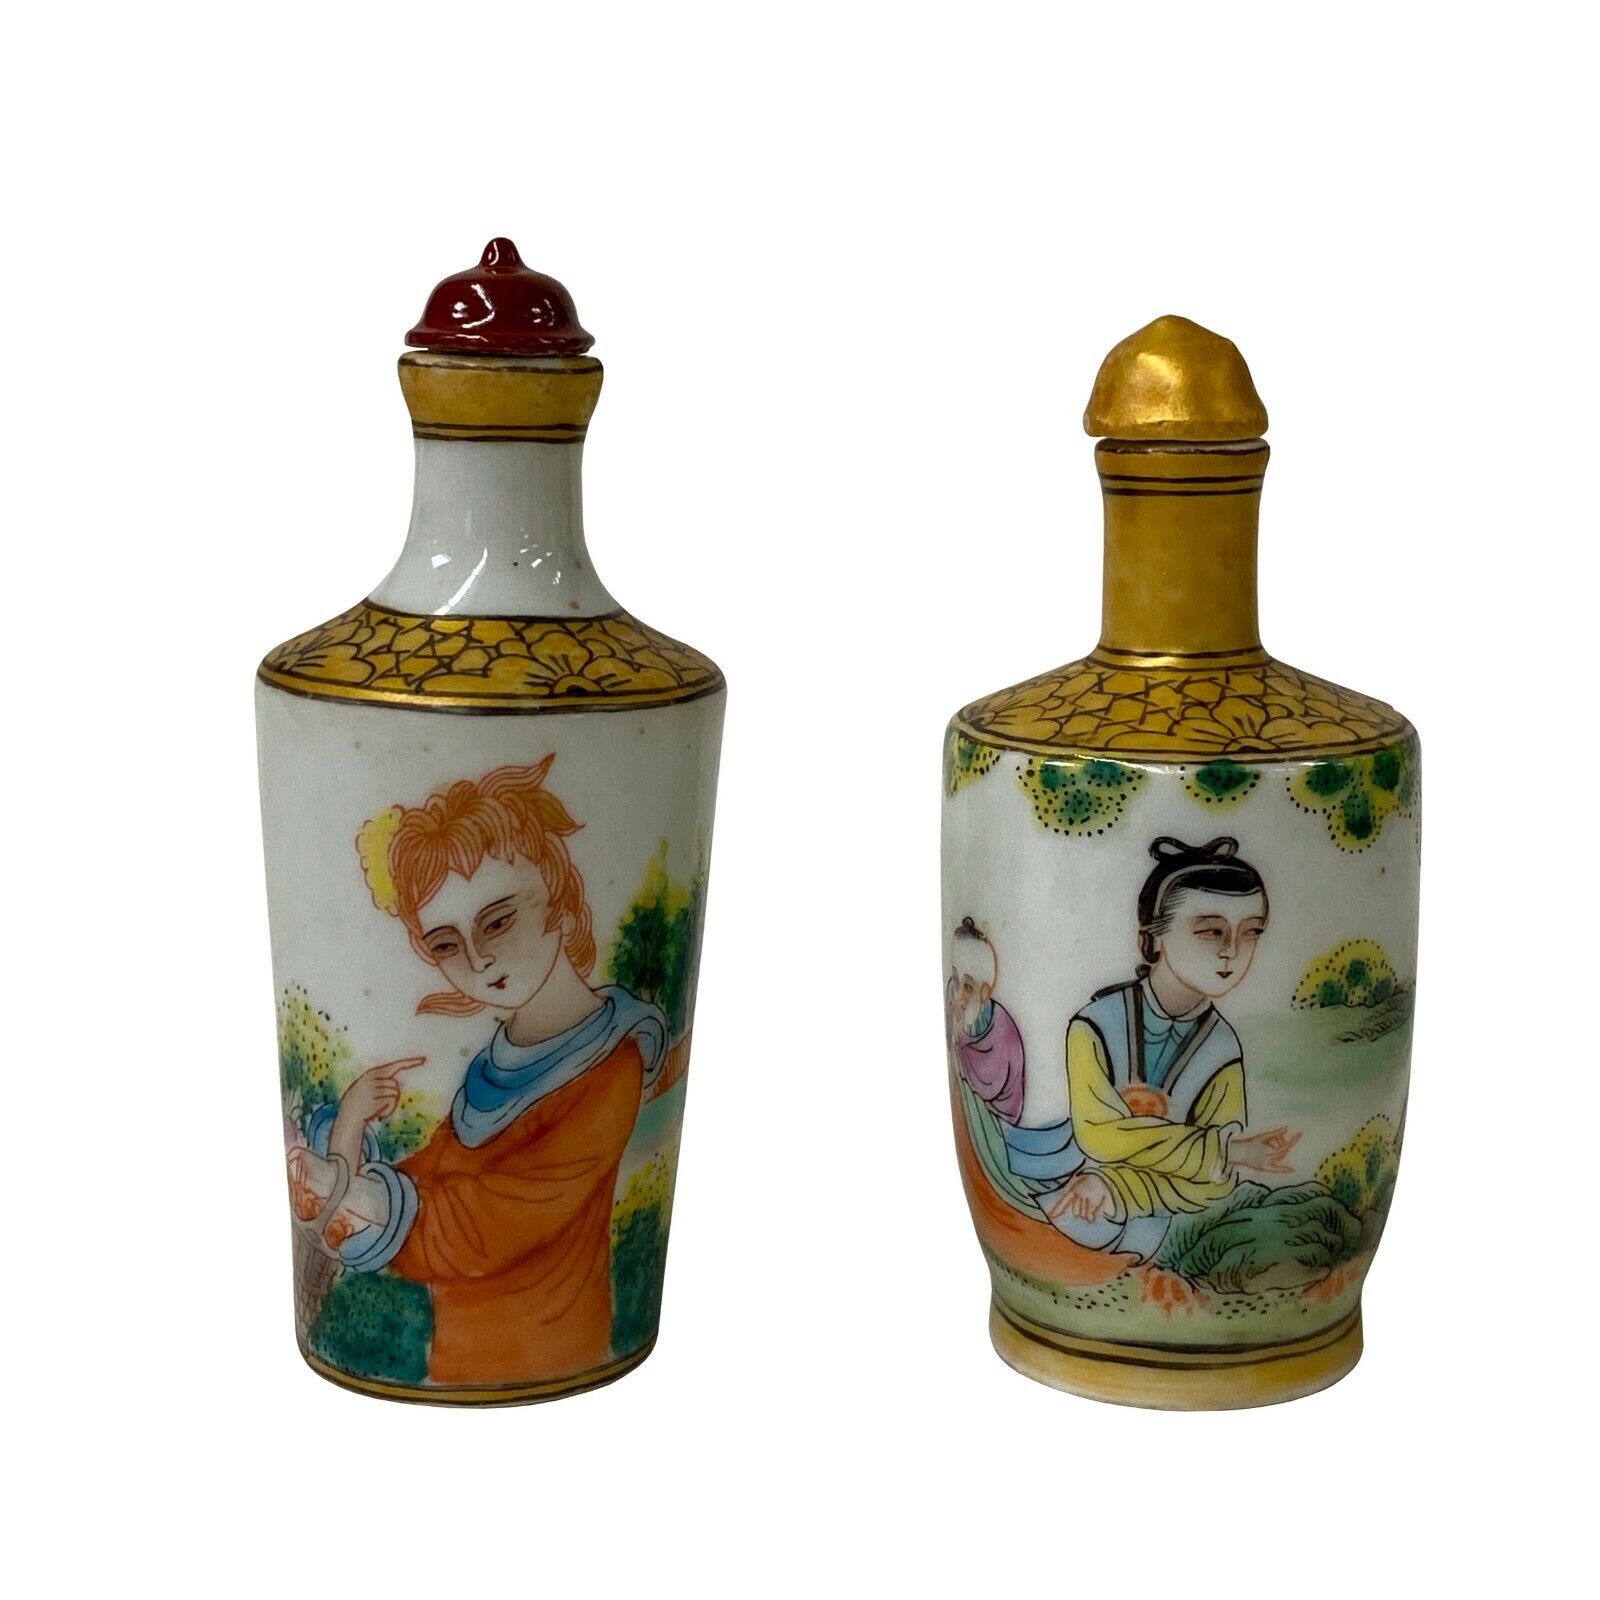 2 x Chinese Porcelain Snuff Bottle Flowers Ladies Graphic ws1254